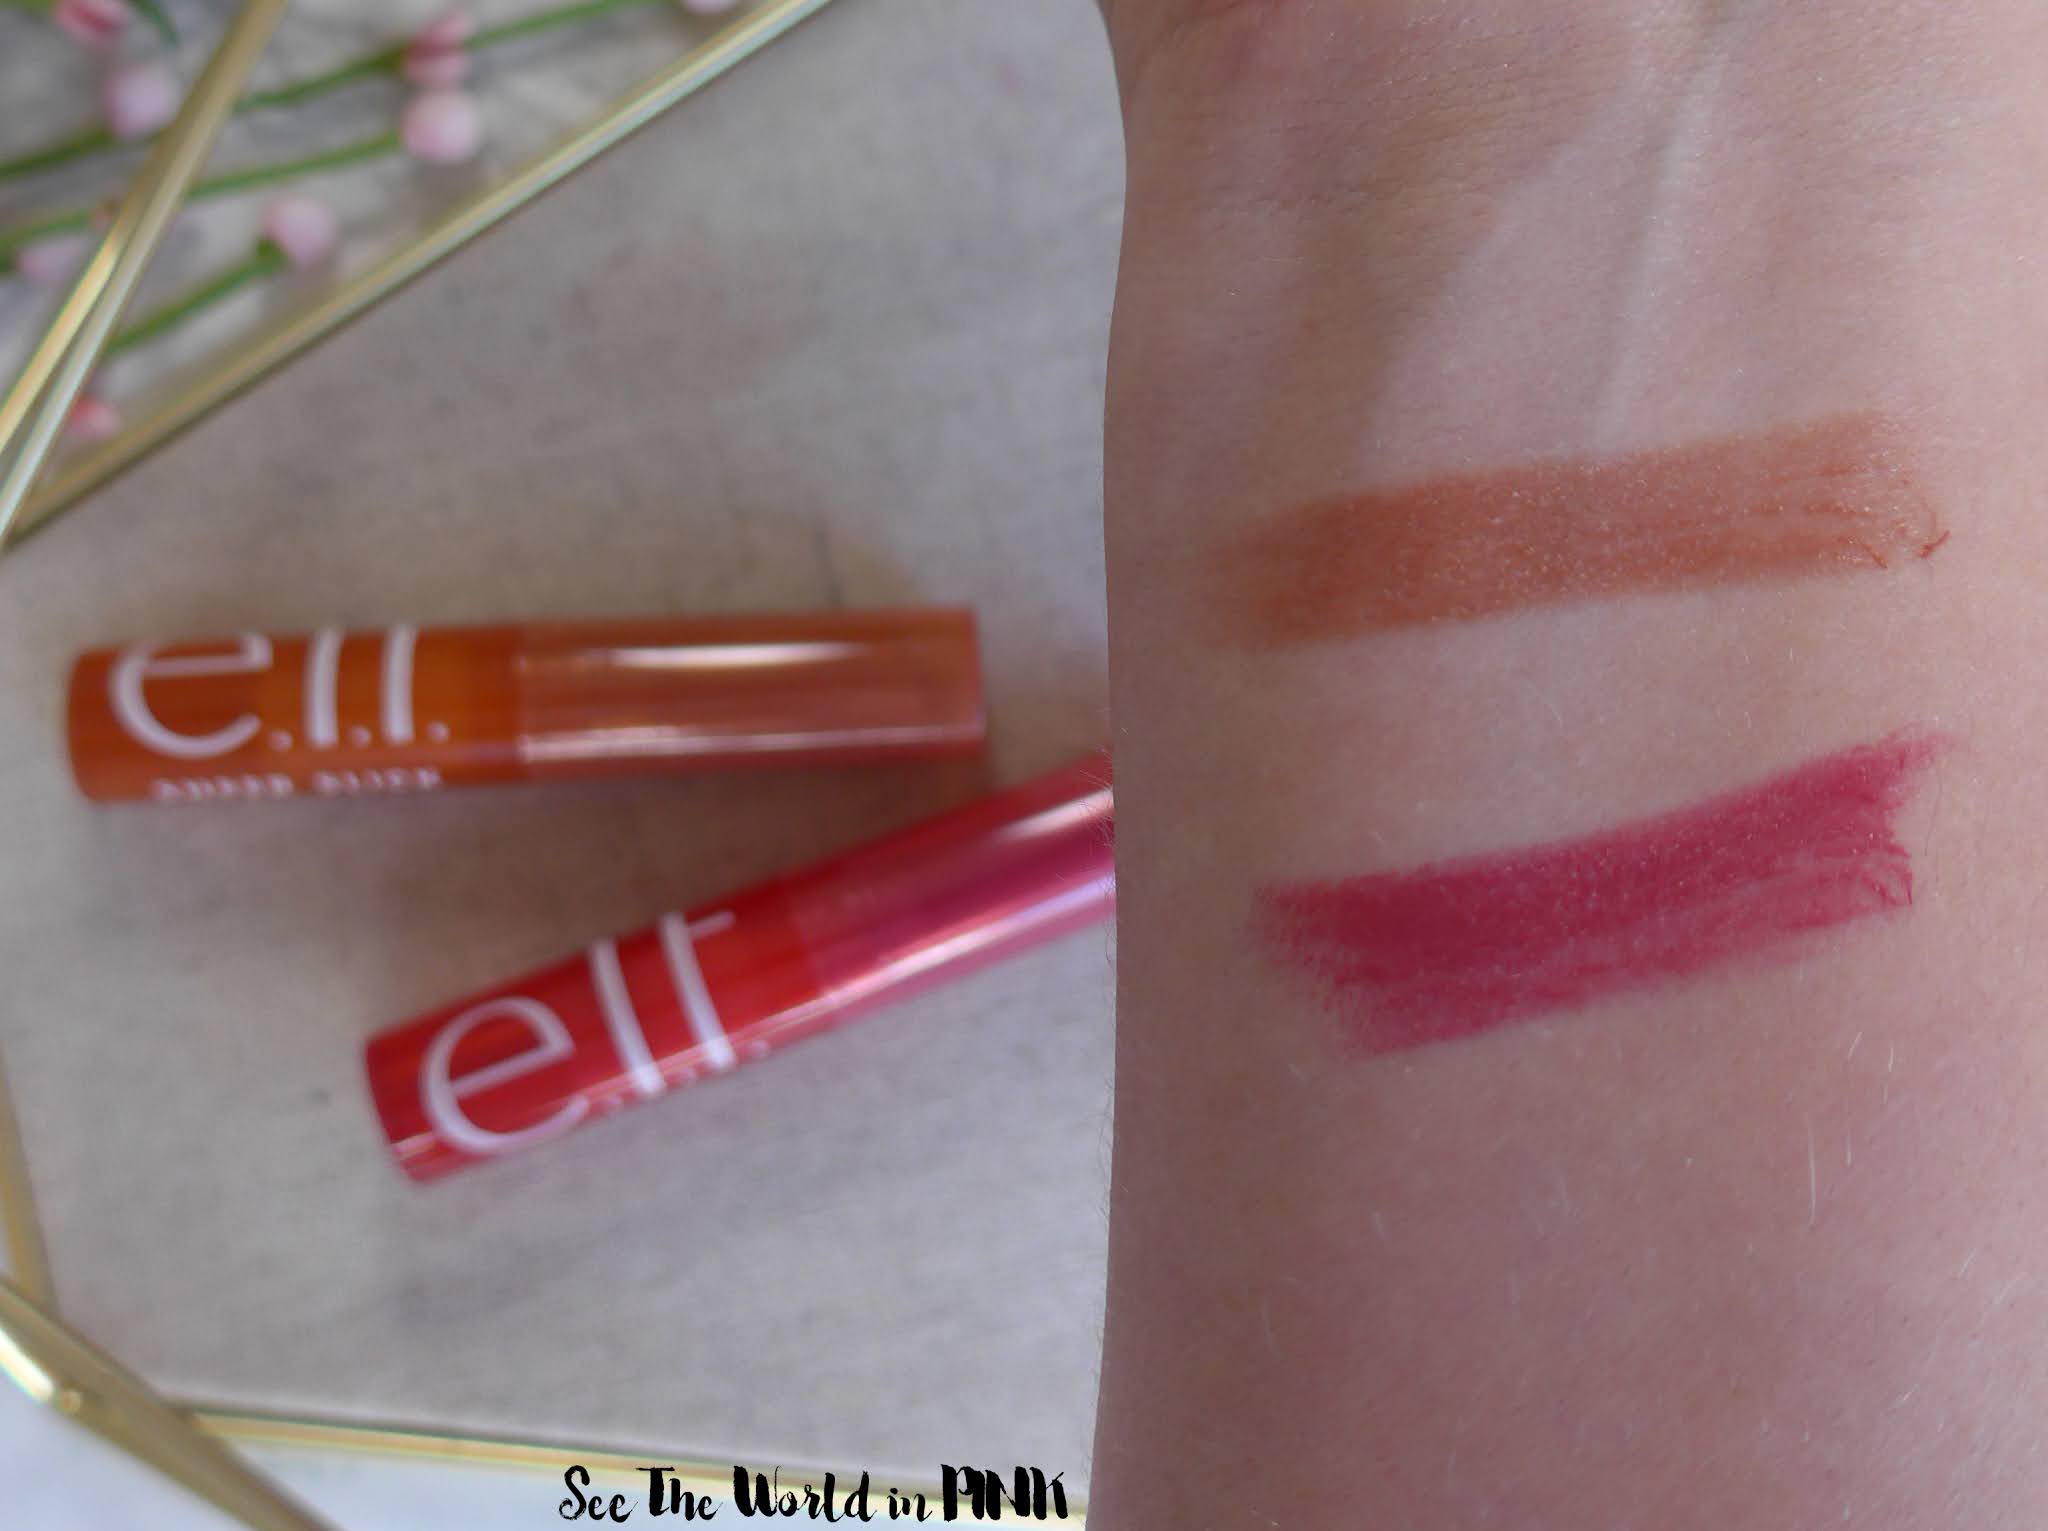 Trying New(ish) e.l.f. Cosmetics ~ Bite Size Face Duos, Bite Size Eyeshadows, and Sheer Slick Lipstick